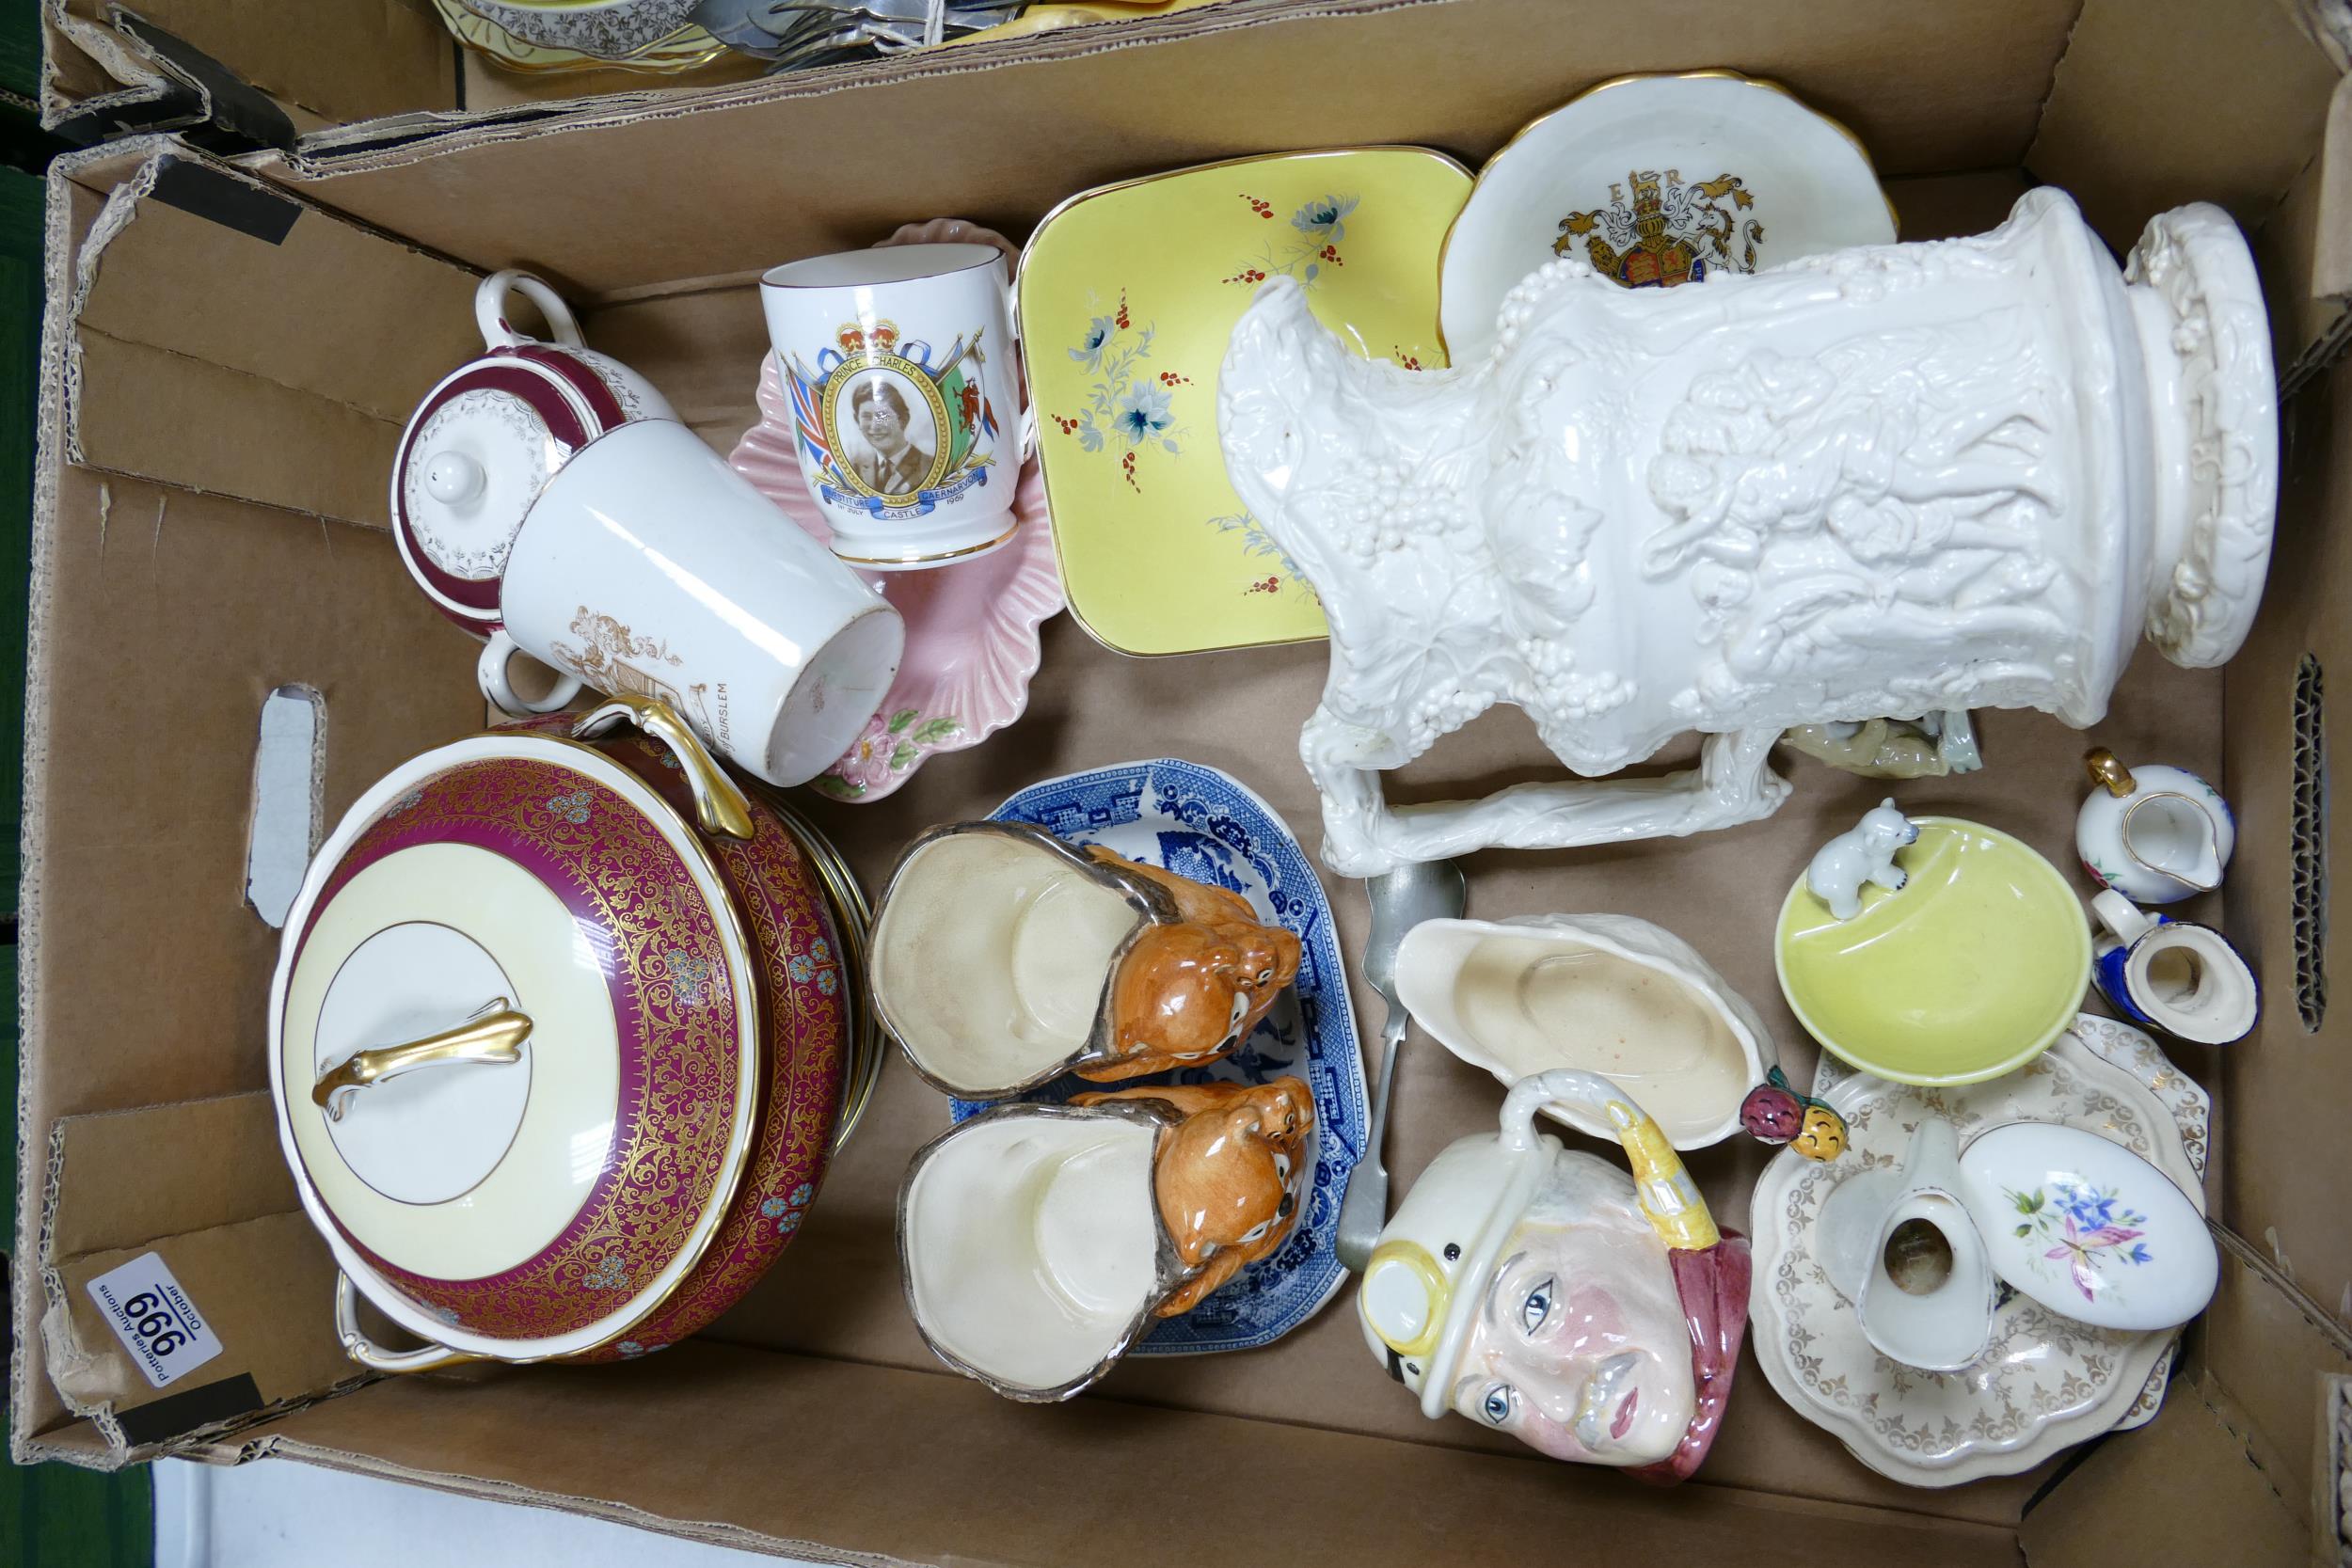 A mixed collection of items to include Tuscan tureen, Wade ashtray, embossed jug, mugs etc